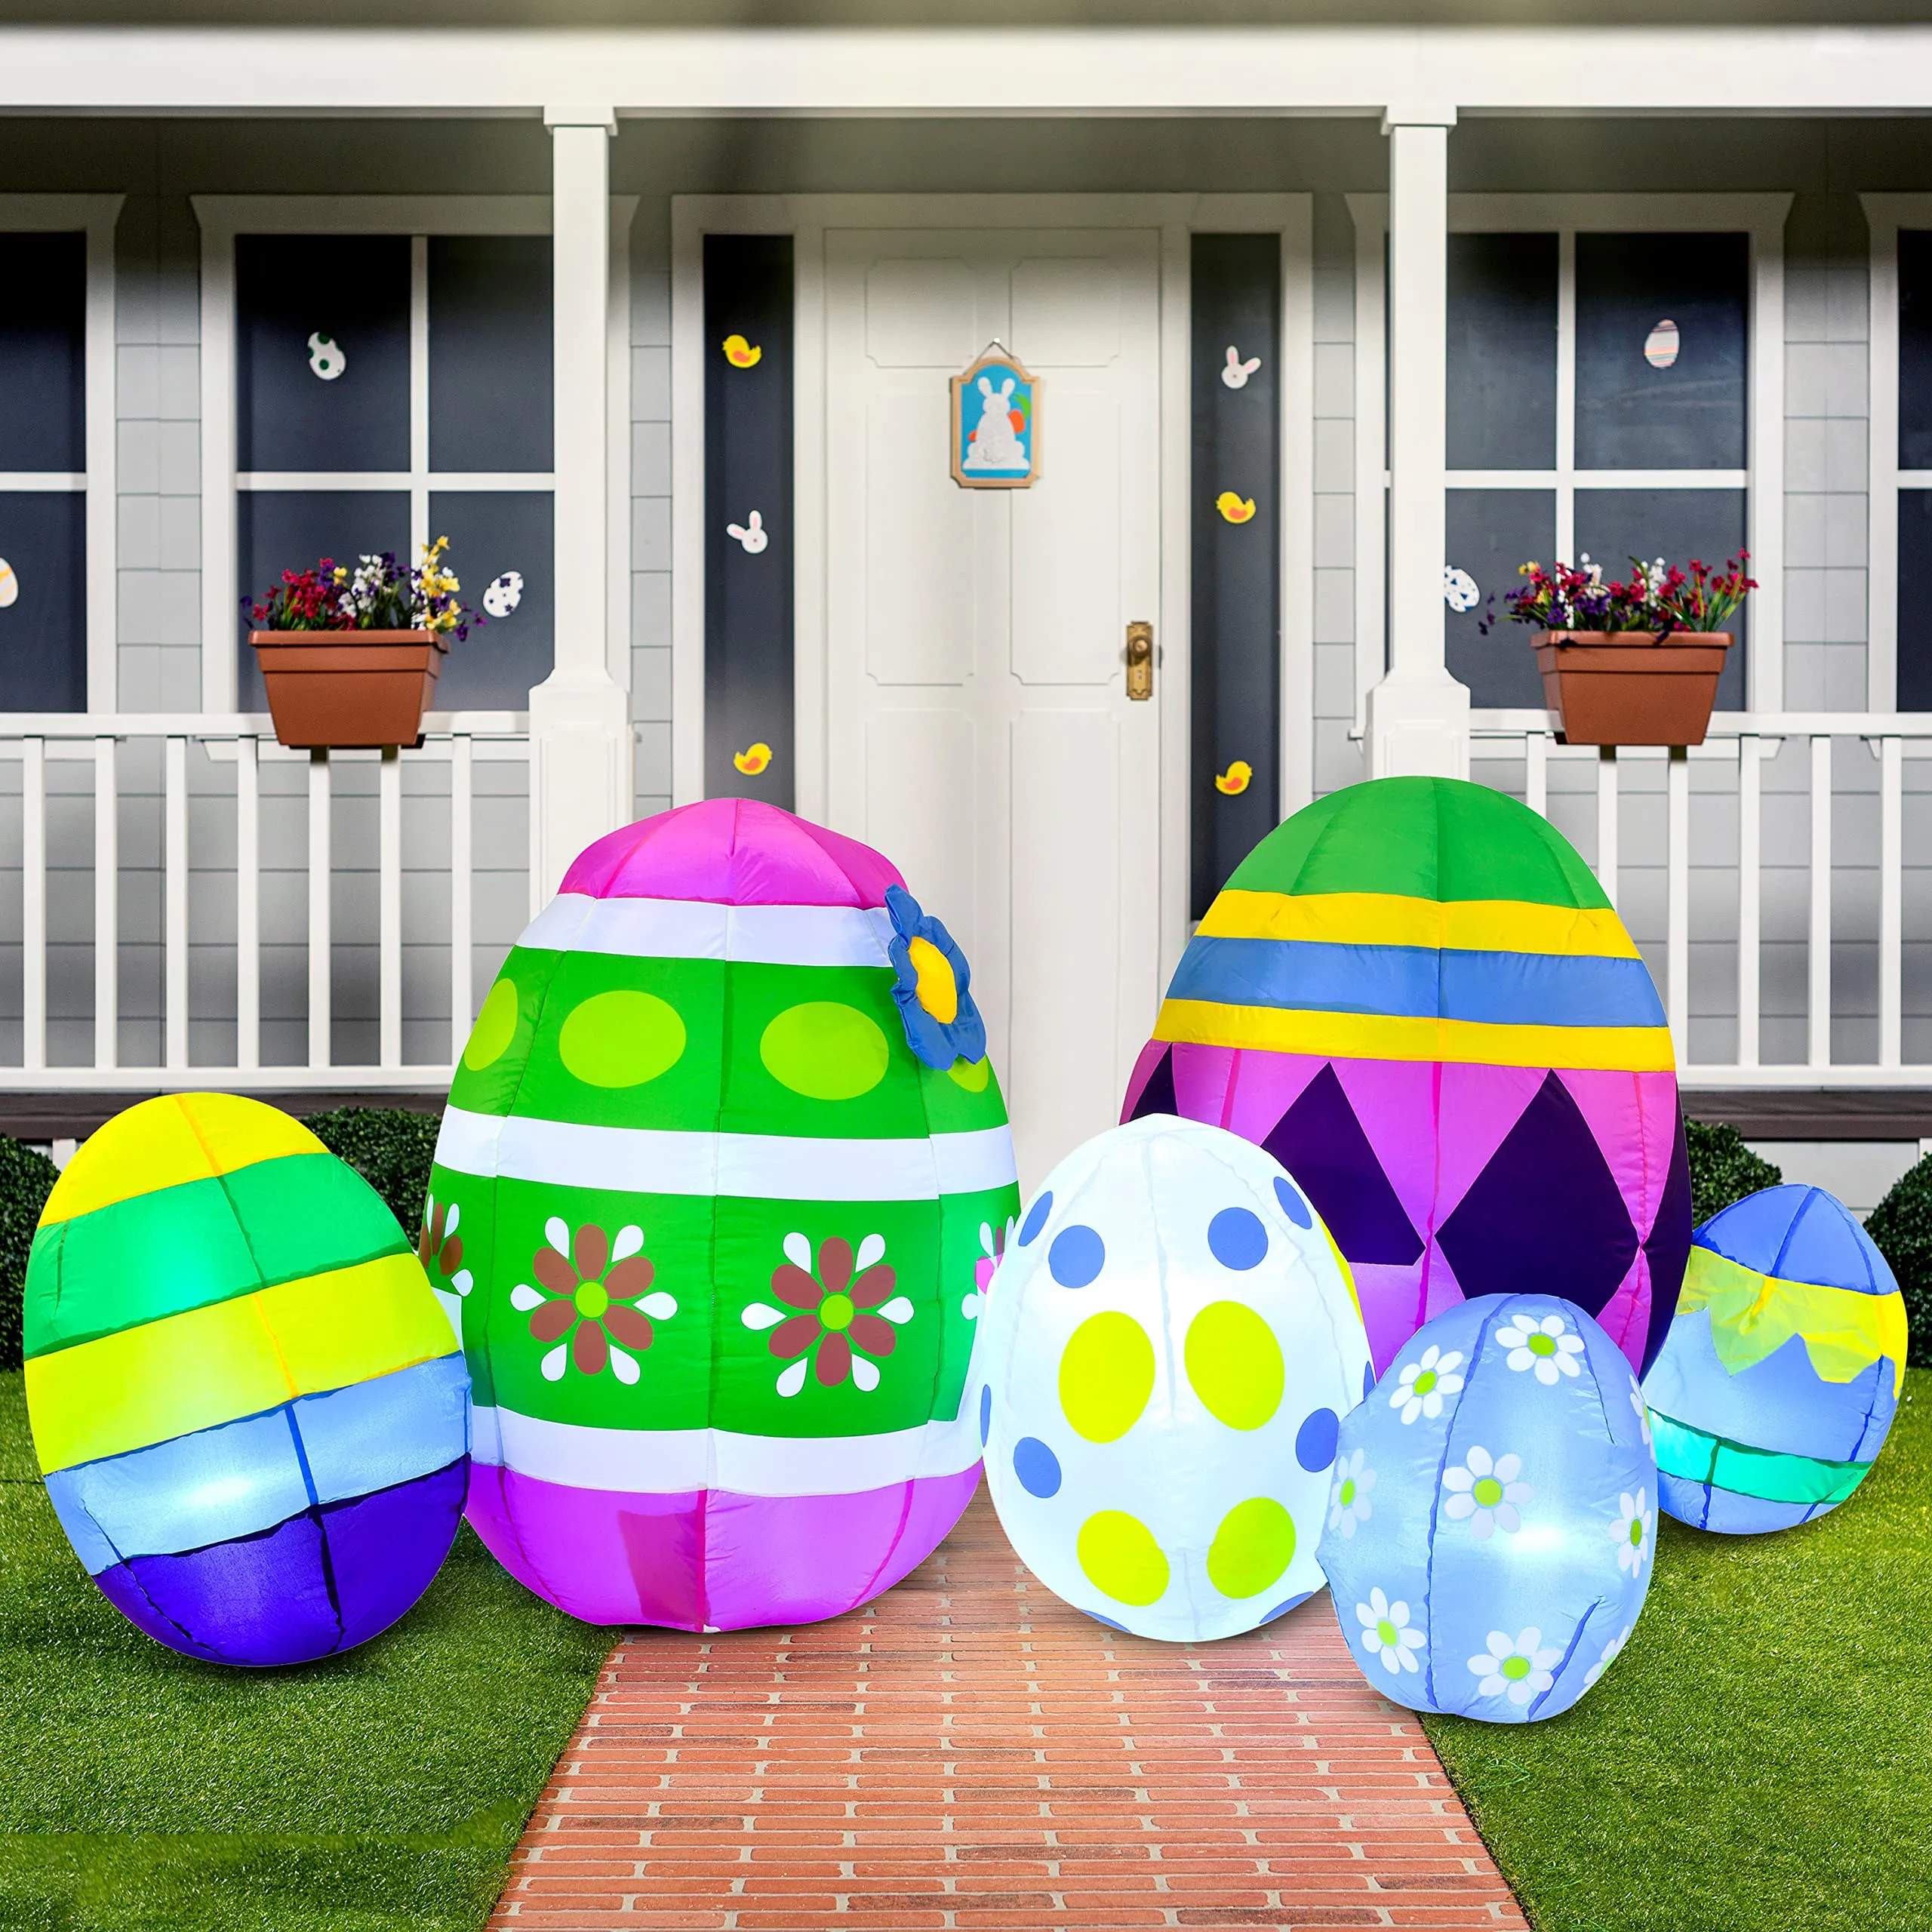 You are currently viewing How can I make my outdoor space festive for Easter without going overboard?